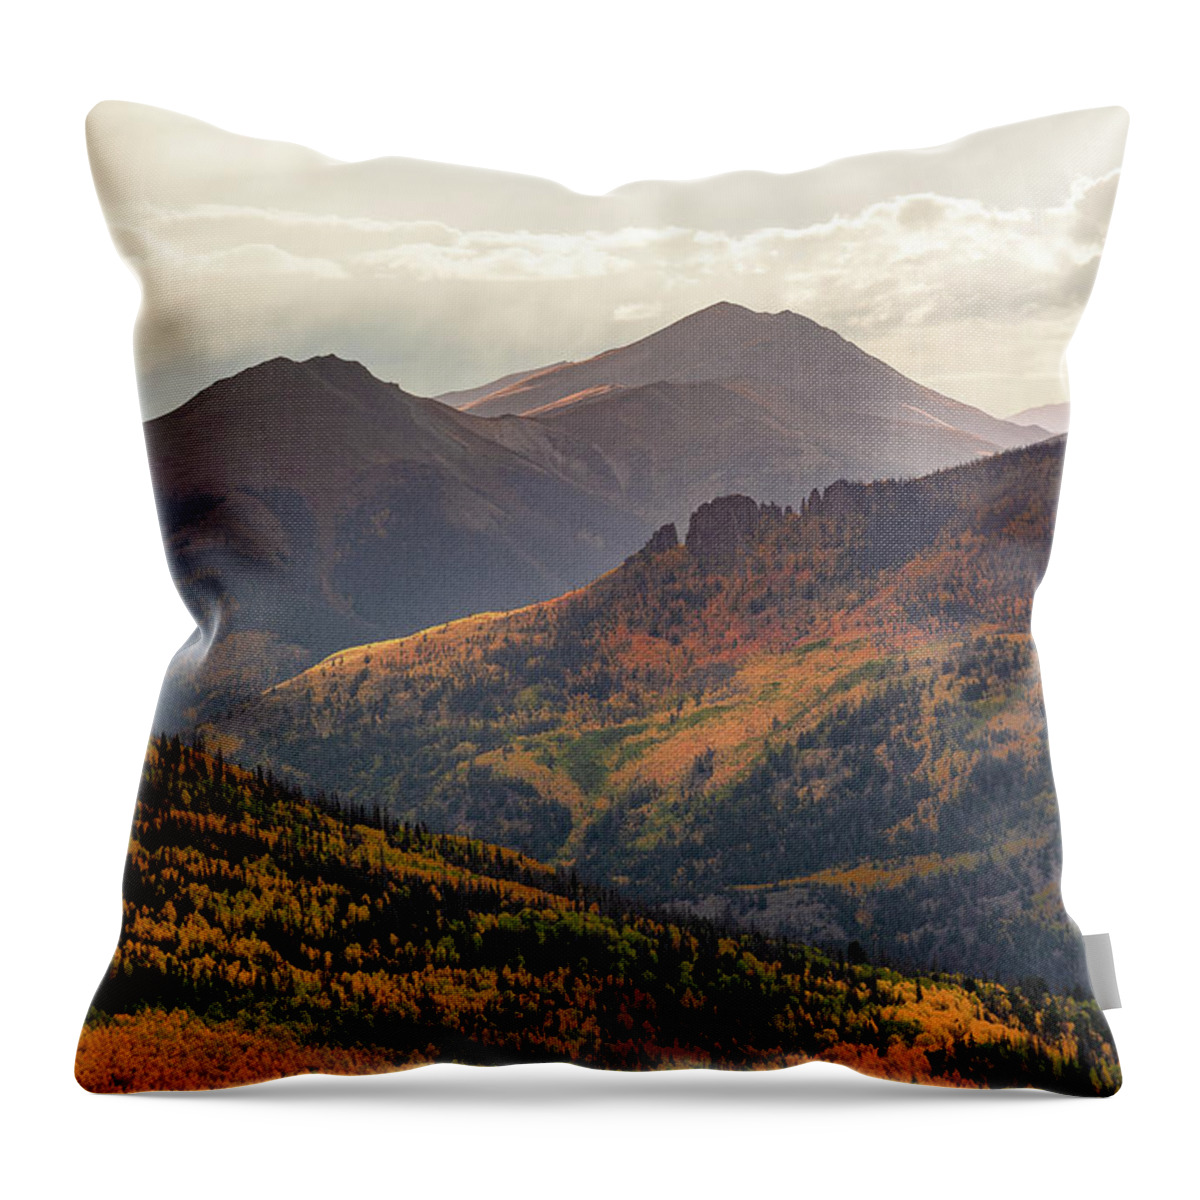 Colorado Throw Pillow featuring the photograph Grassy Mountain and Red - San Juan Mountains by Aaron Spong